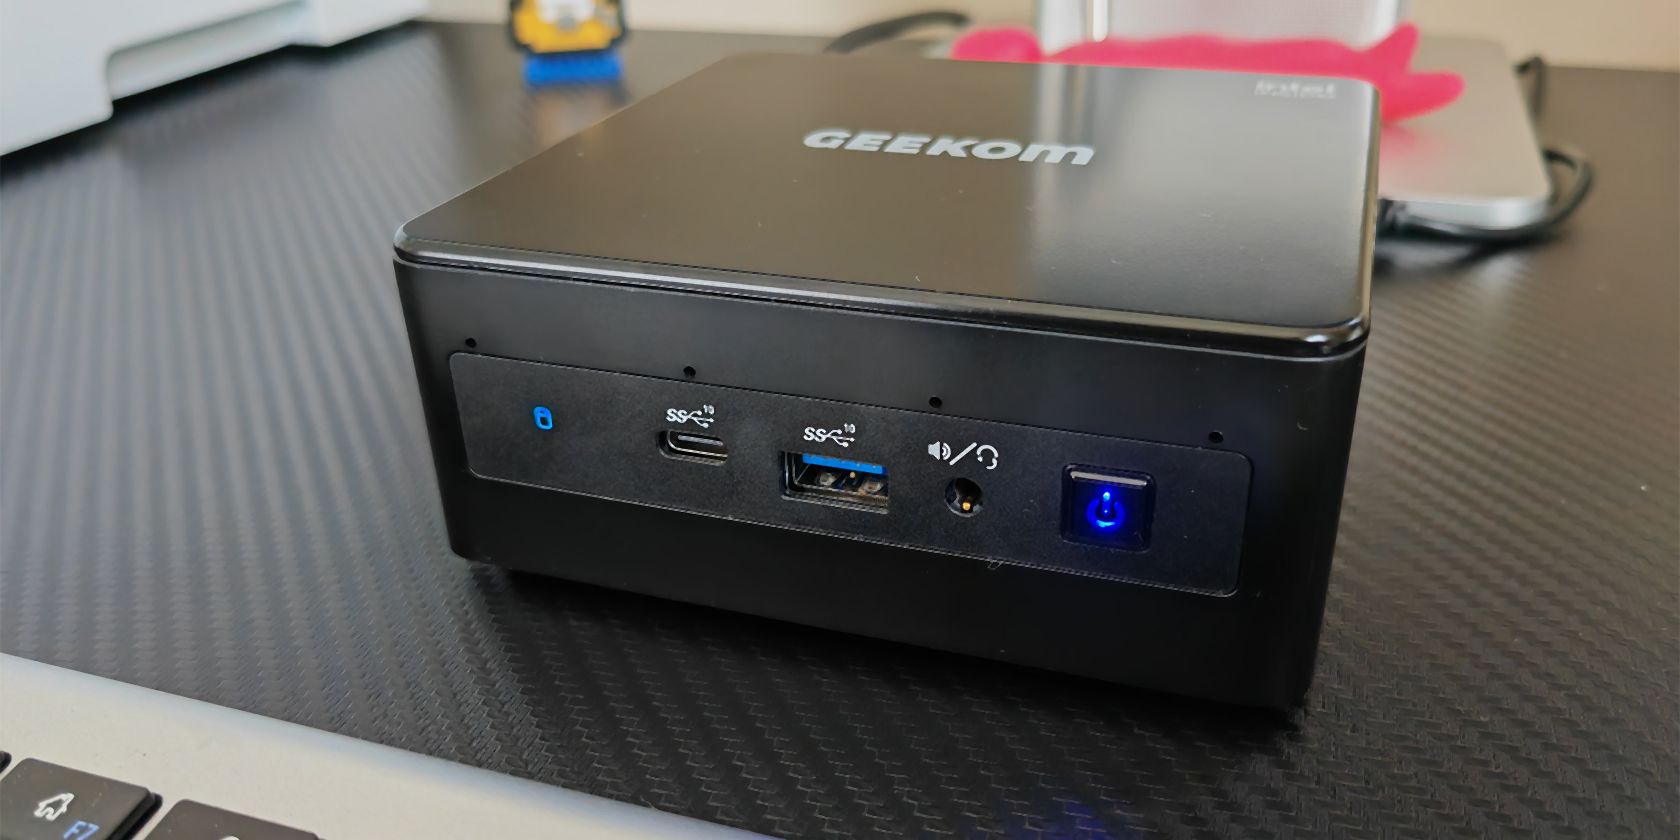 Geekom IT8 mini pc switched on